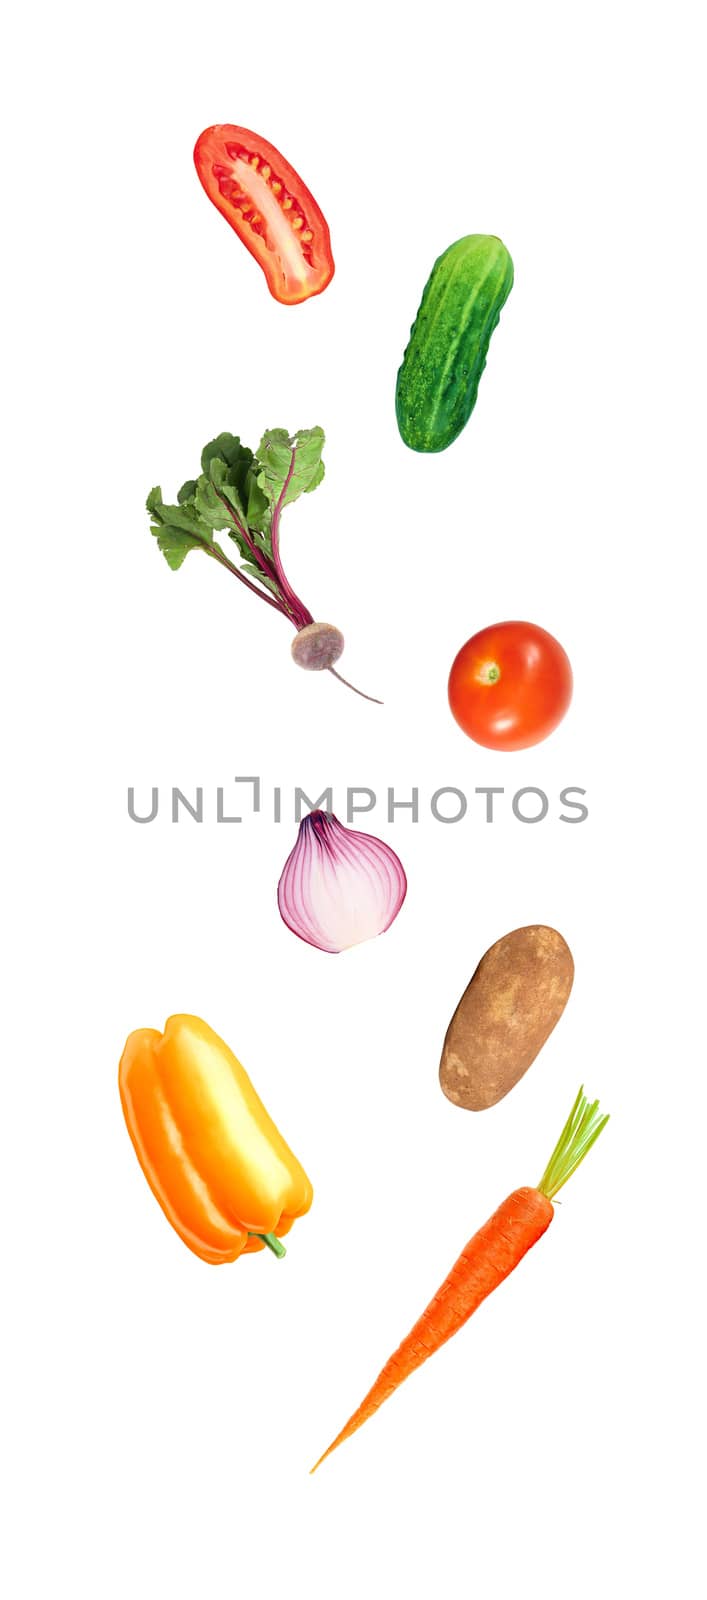 Falling fresh color vegetables by ozaiachin